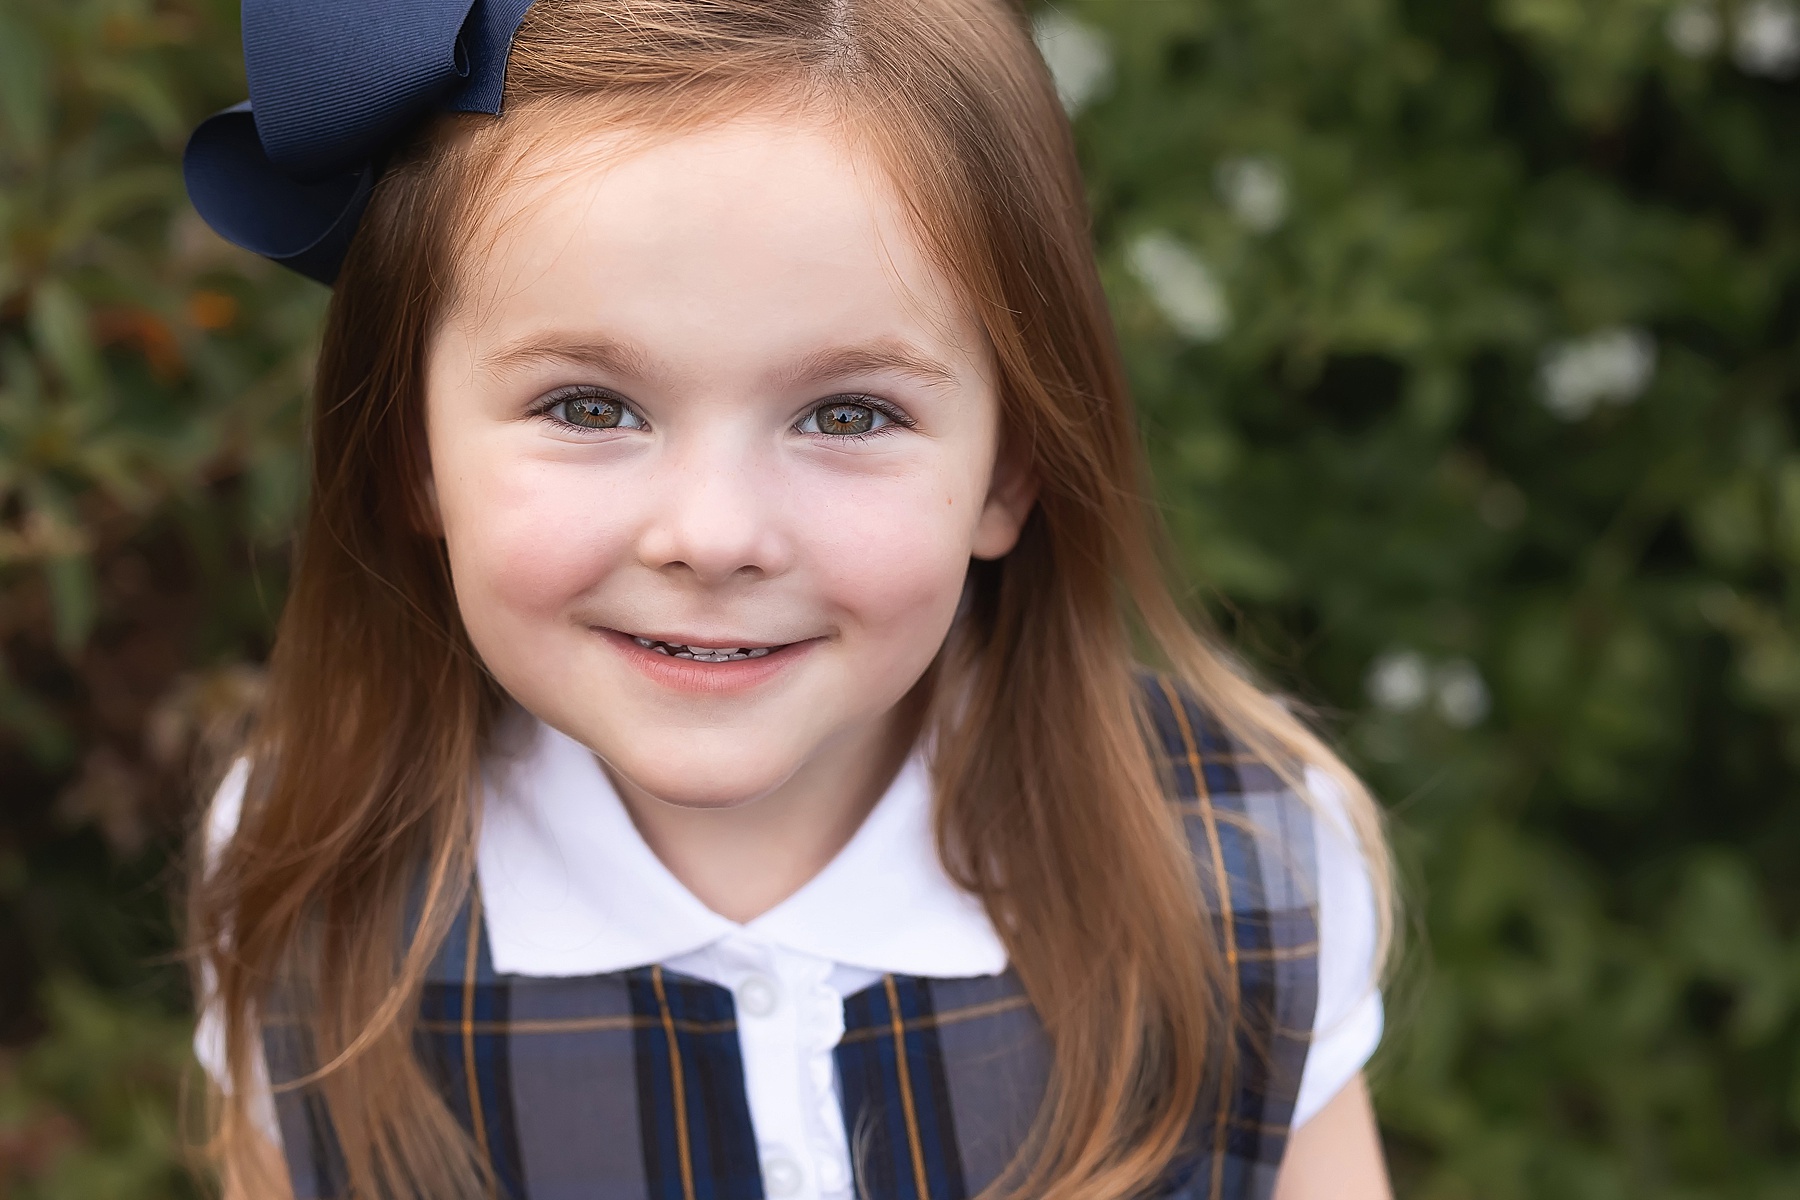 little girl with red hair dressed in navy and white plaid smiling in a garden on her first day of pre-school in st. augustine florida 